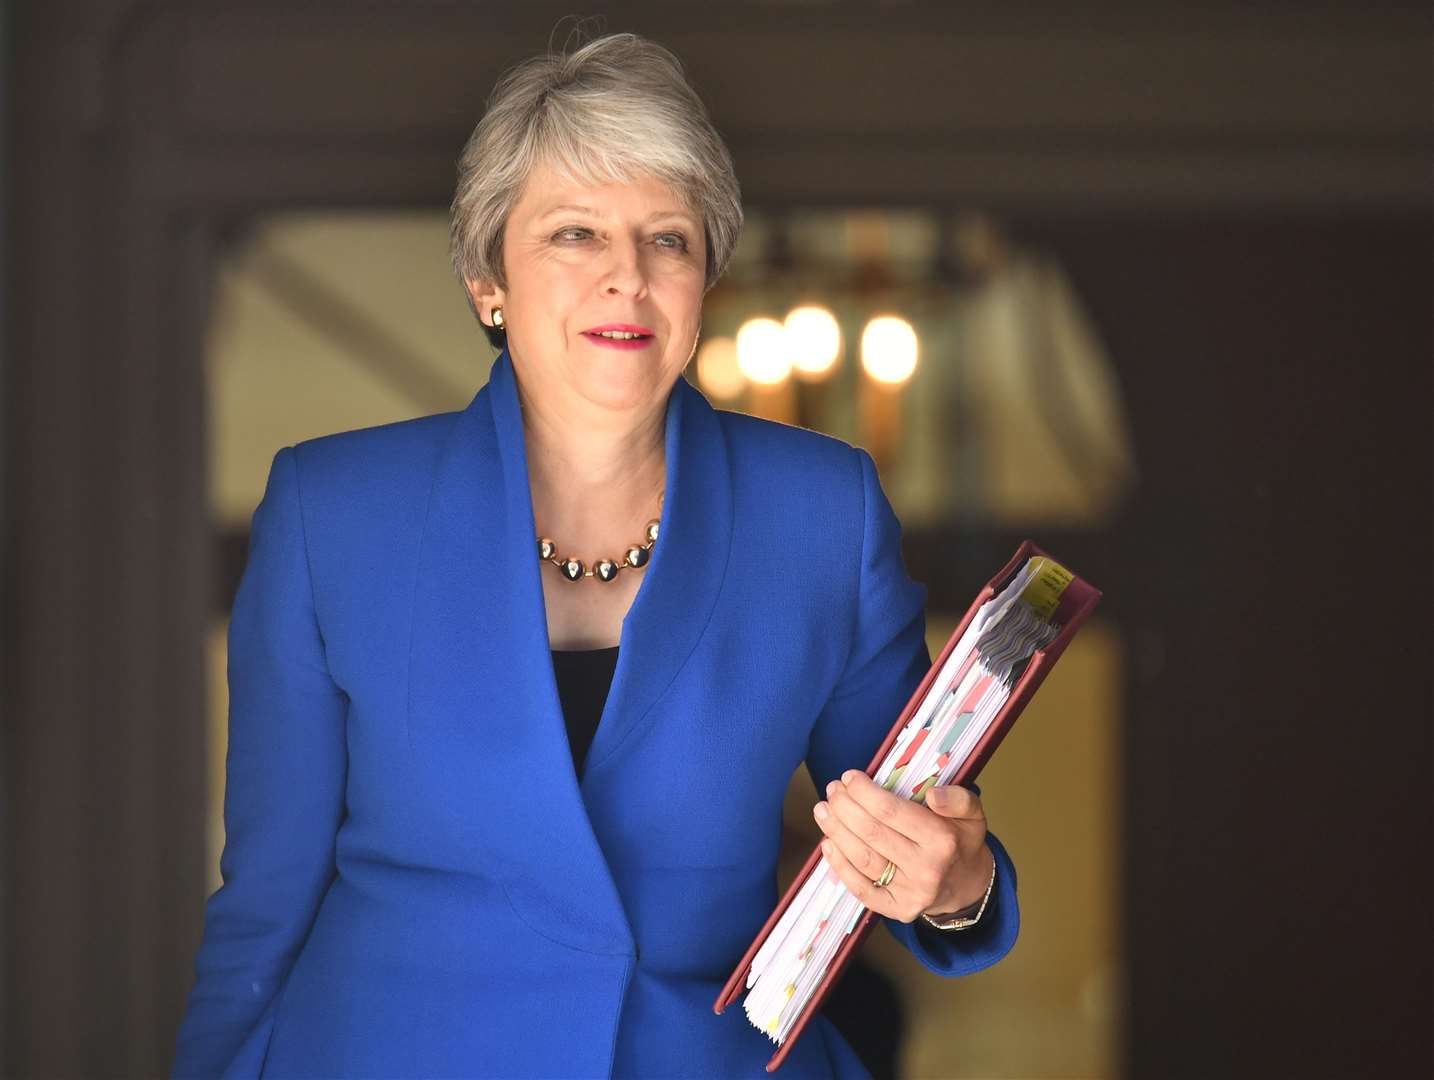 Theresa May received £97,000 for speaking at an event hosted by private equity firm Apax Partners (Dominic Lipinski/PA)